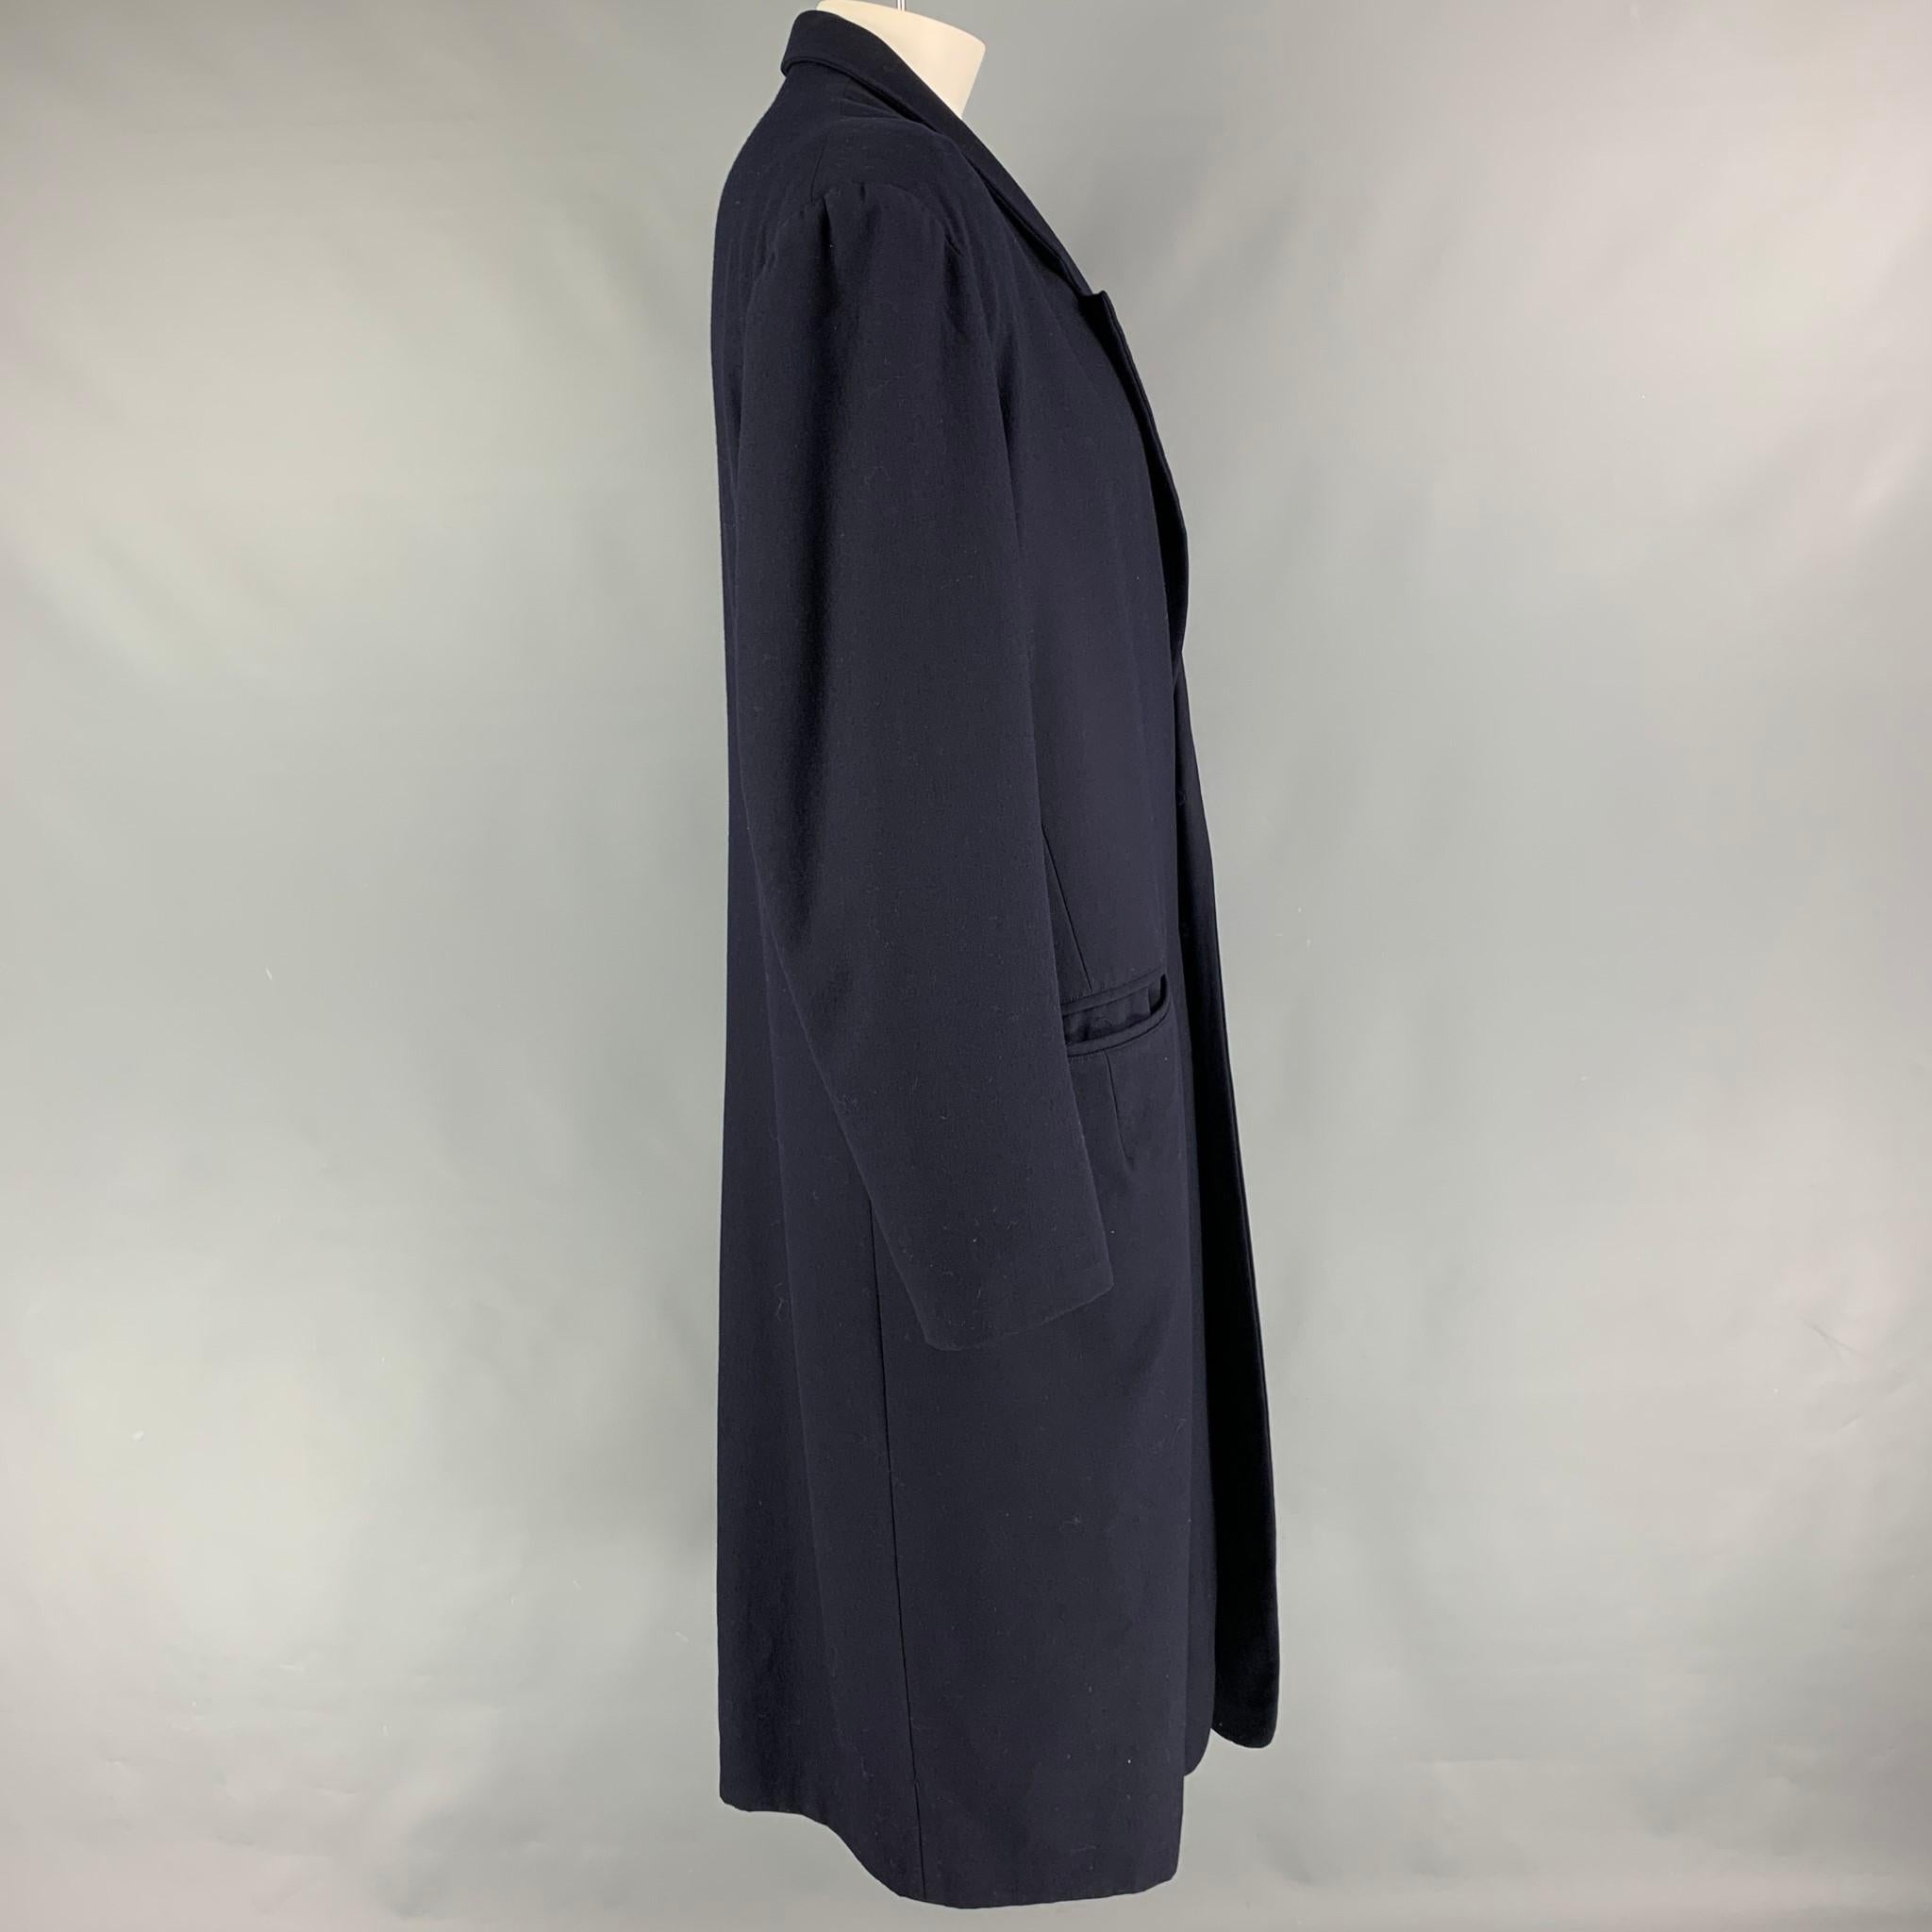 YOHJI YAMAMOTO coat comes in a navy wool with a full liner featuring a peak lapel, oversized fit, slit pockets, and a three button closure. Made in Japan. 
 

Very Good Pre-Owned Condition.
Marked: S

Measurements:

Shoulder: 22 in.
Chest: 50